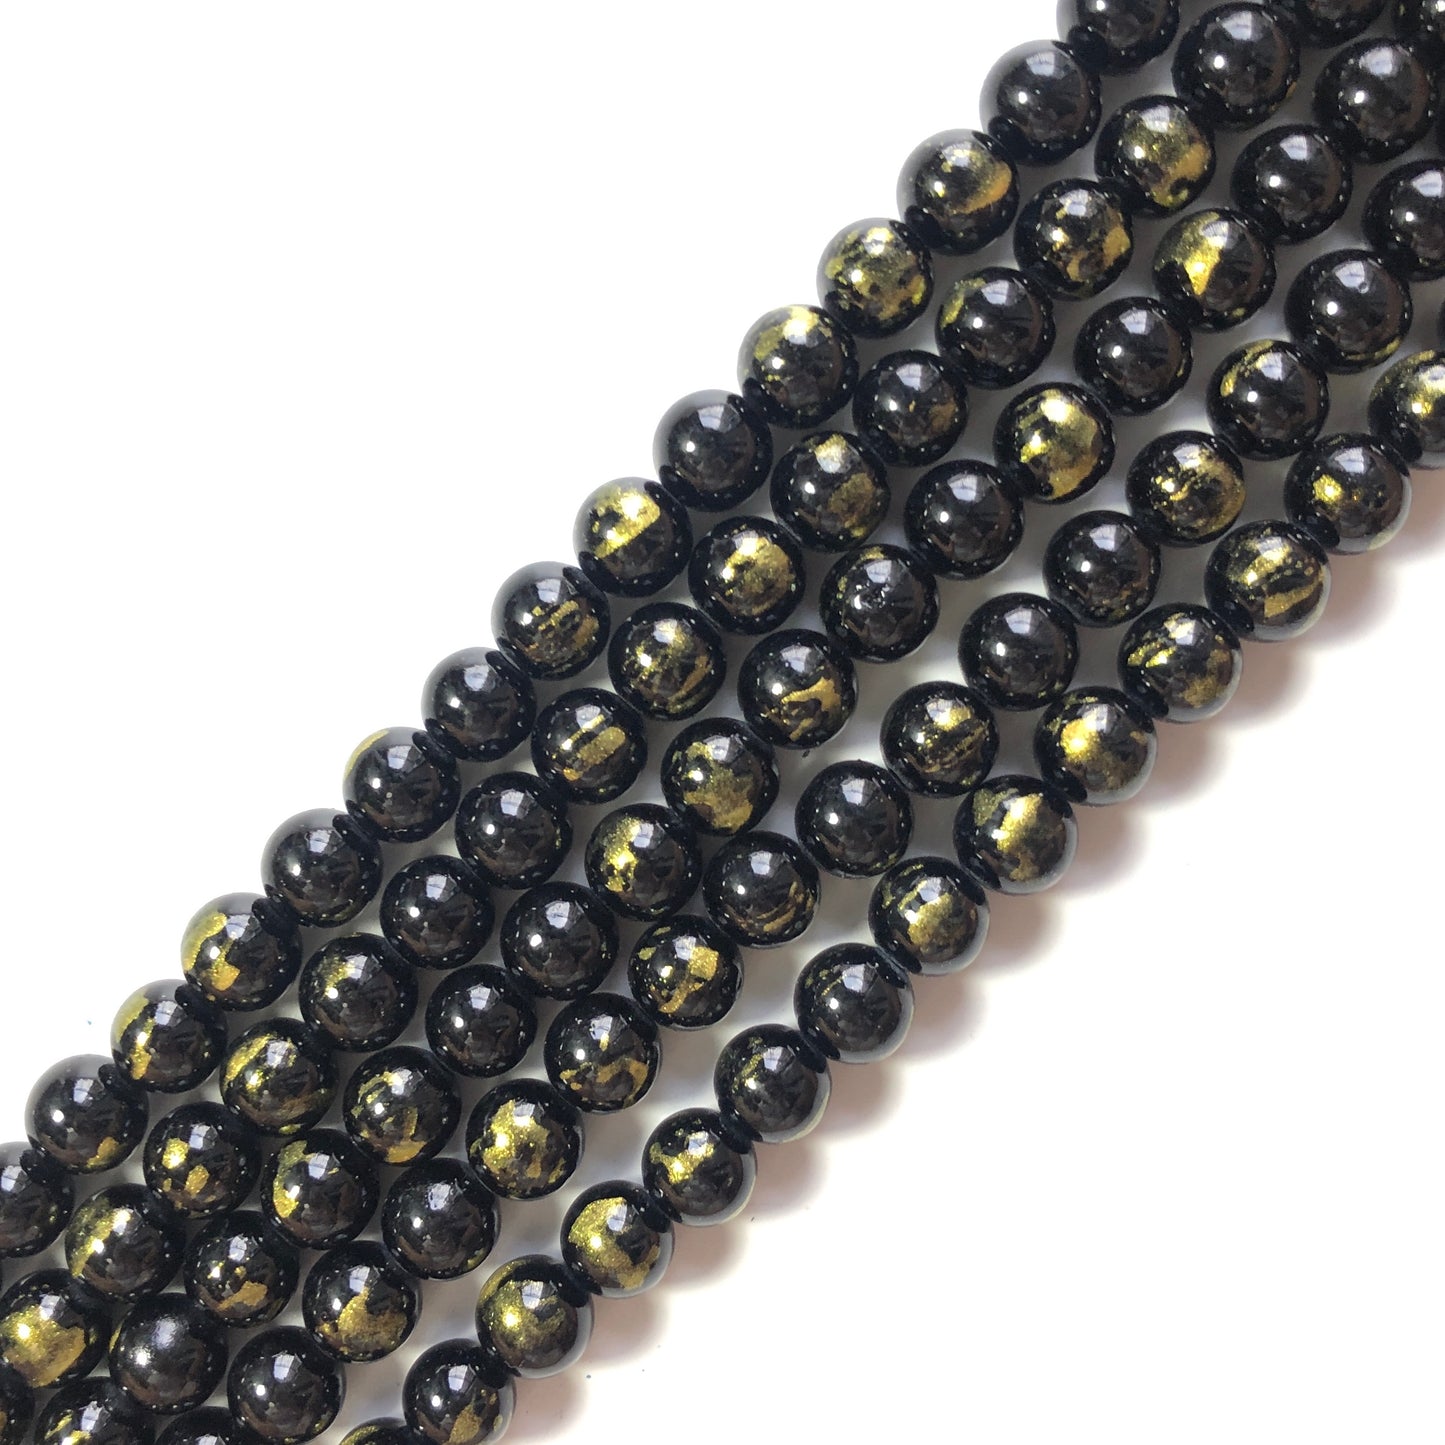 2 Strands/lot 8mm, 10mm Black Gold Plated Jade Round Stone Beads Stone Beads 8mm Stone Beads Gold Plated Jade Beads Round Jade Beads Charms Beads Beyond